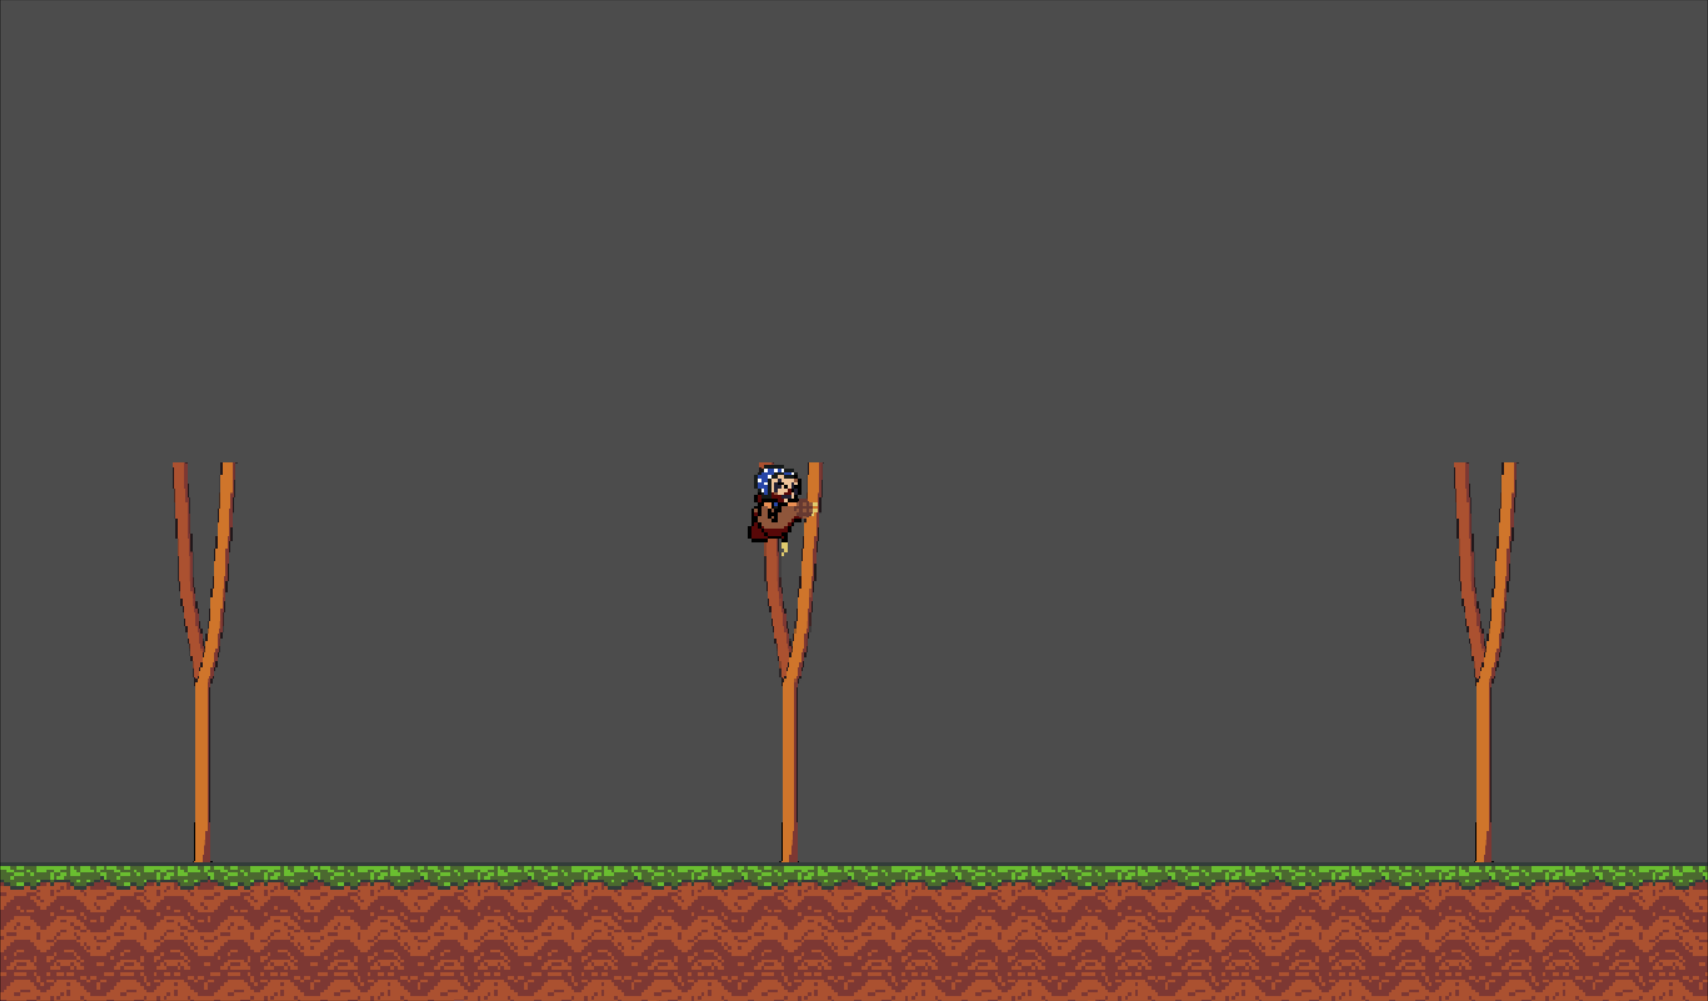 SlothShot, a work-in-progress game made with Godot and a small team. I'm doing the music and a tad bit of coding.